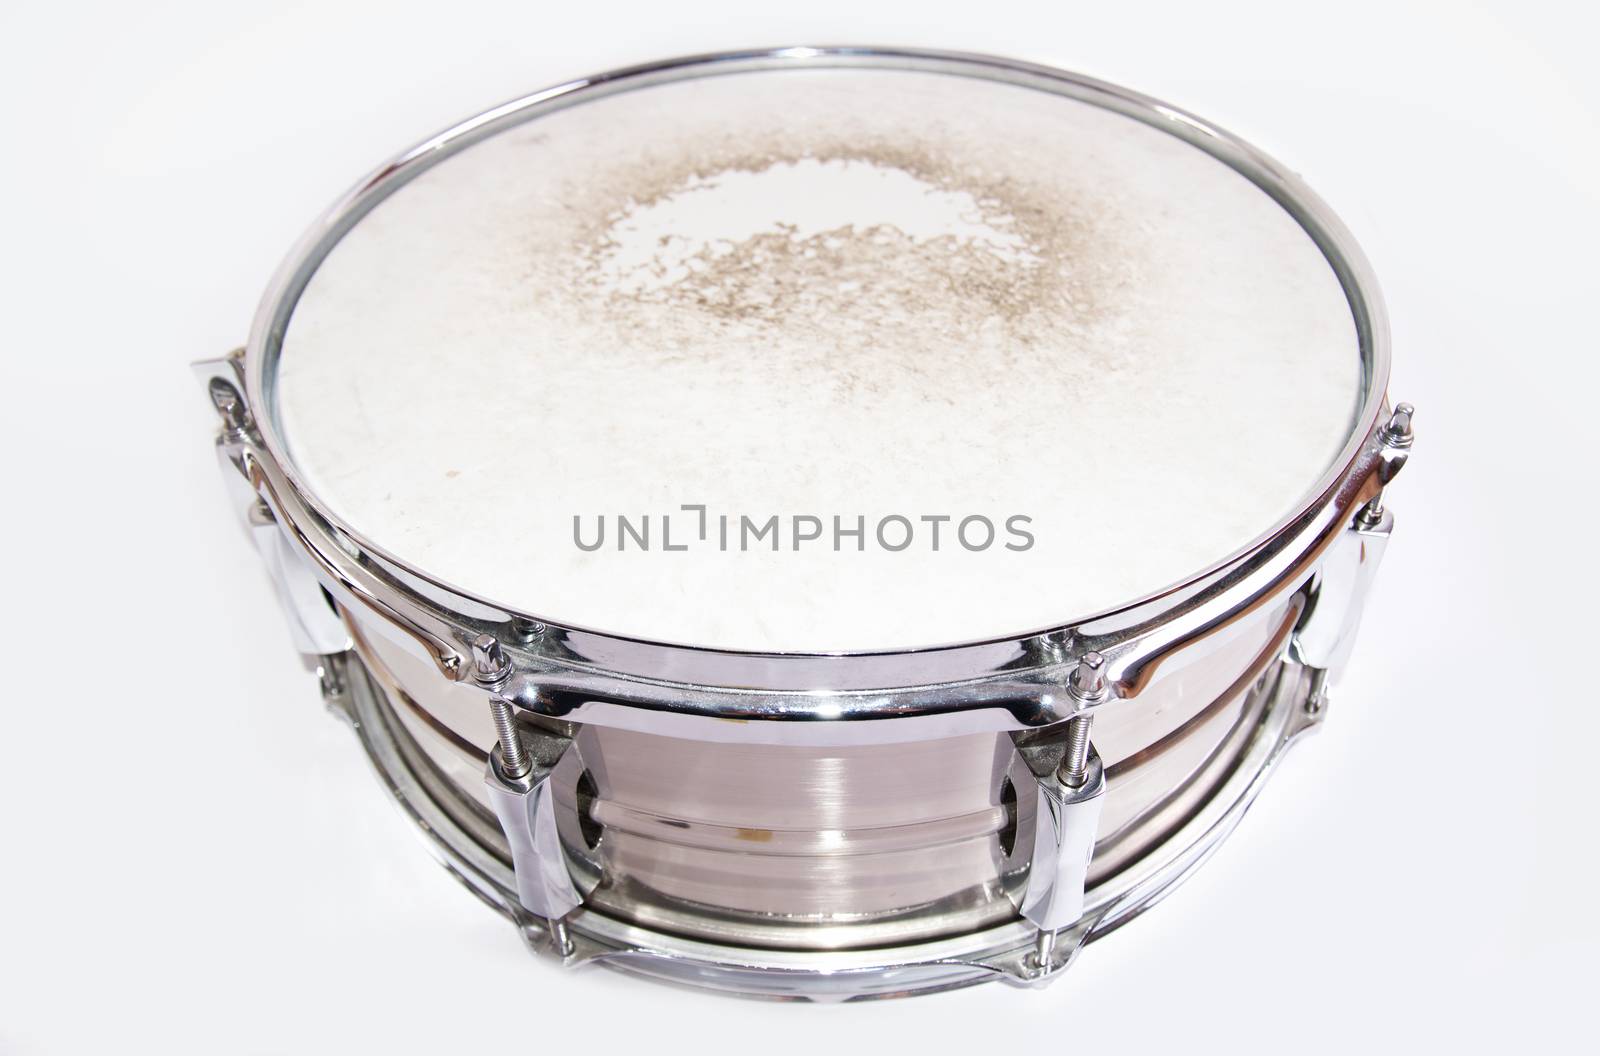 Music conceptual image. Close up of a drum snare on isolated background.